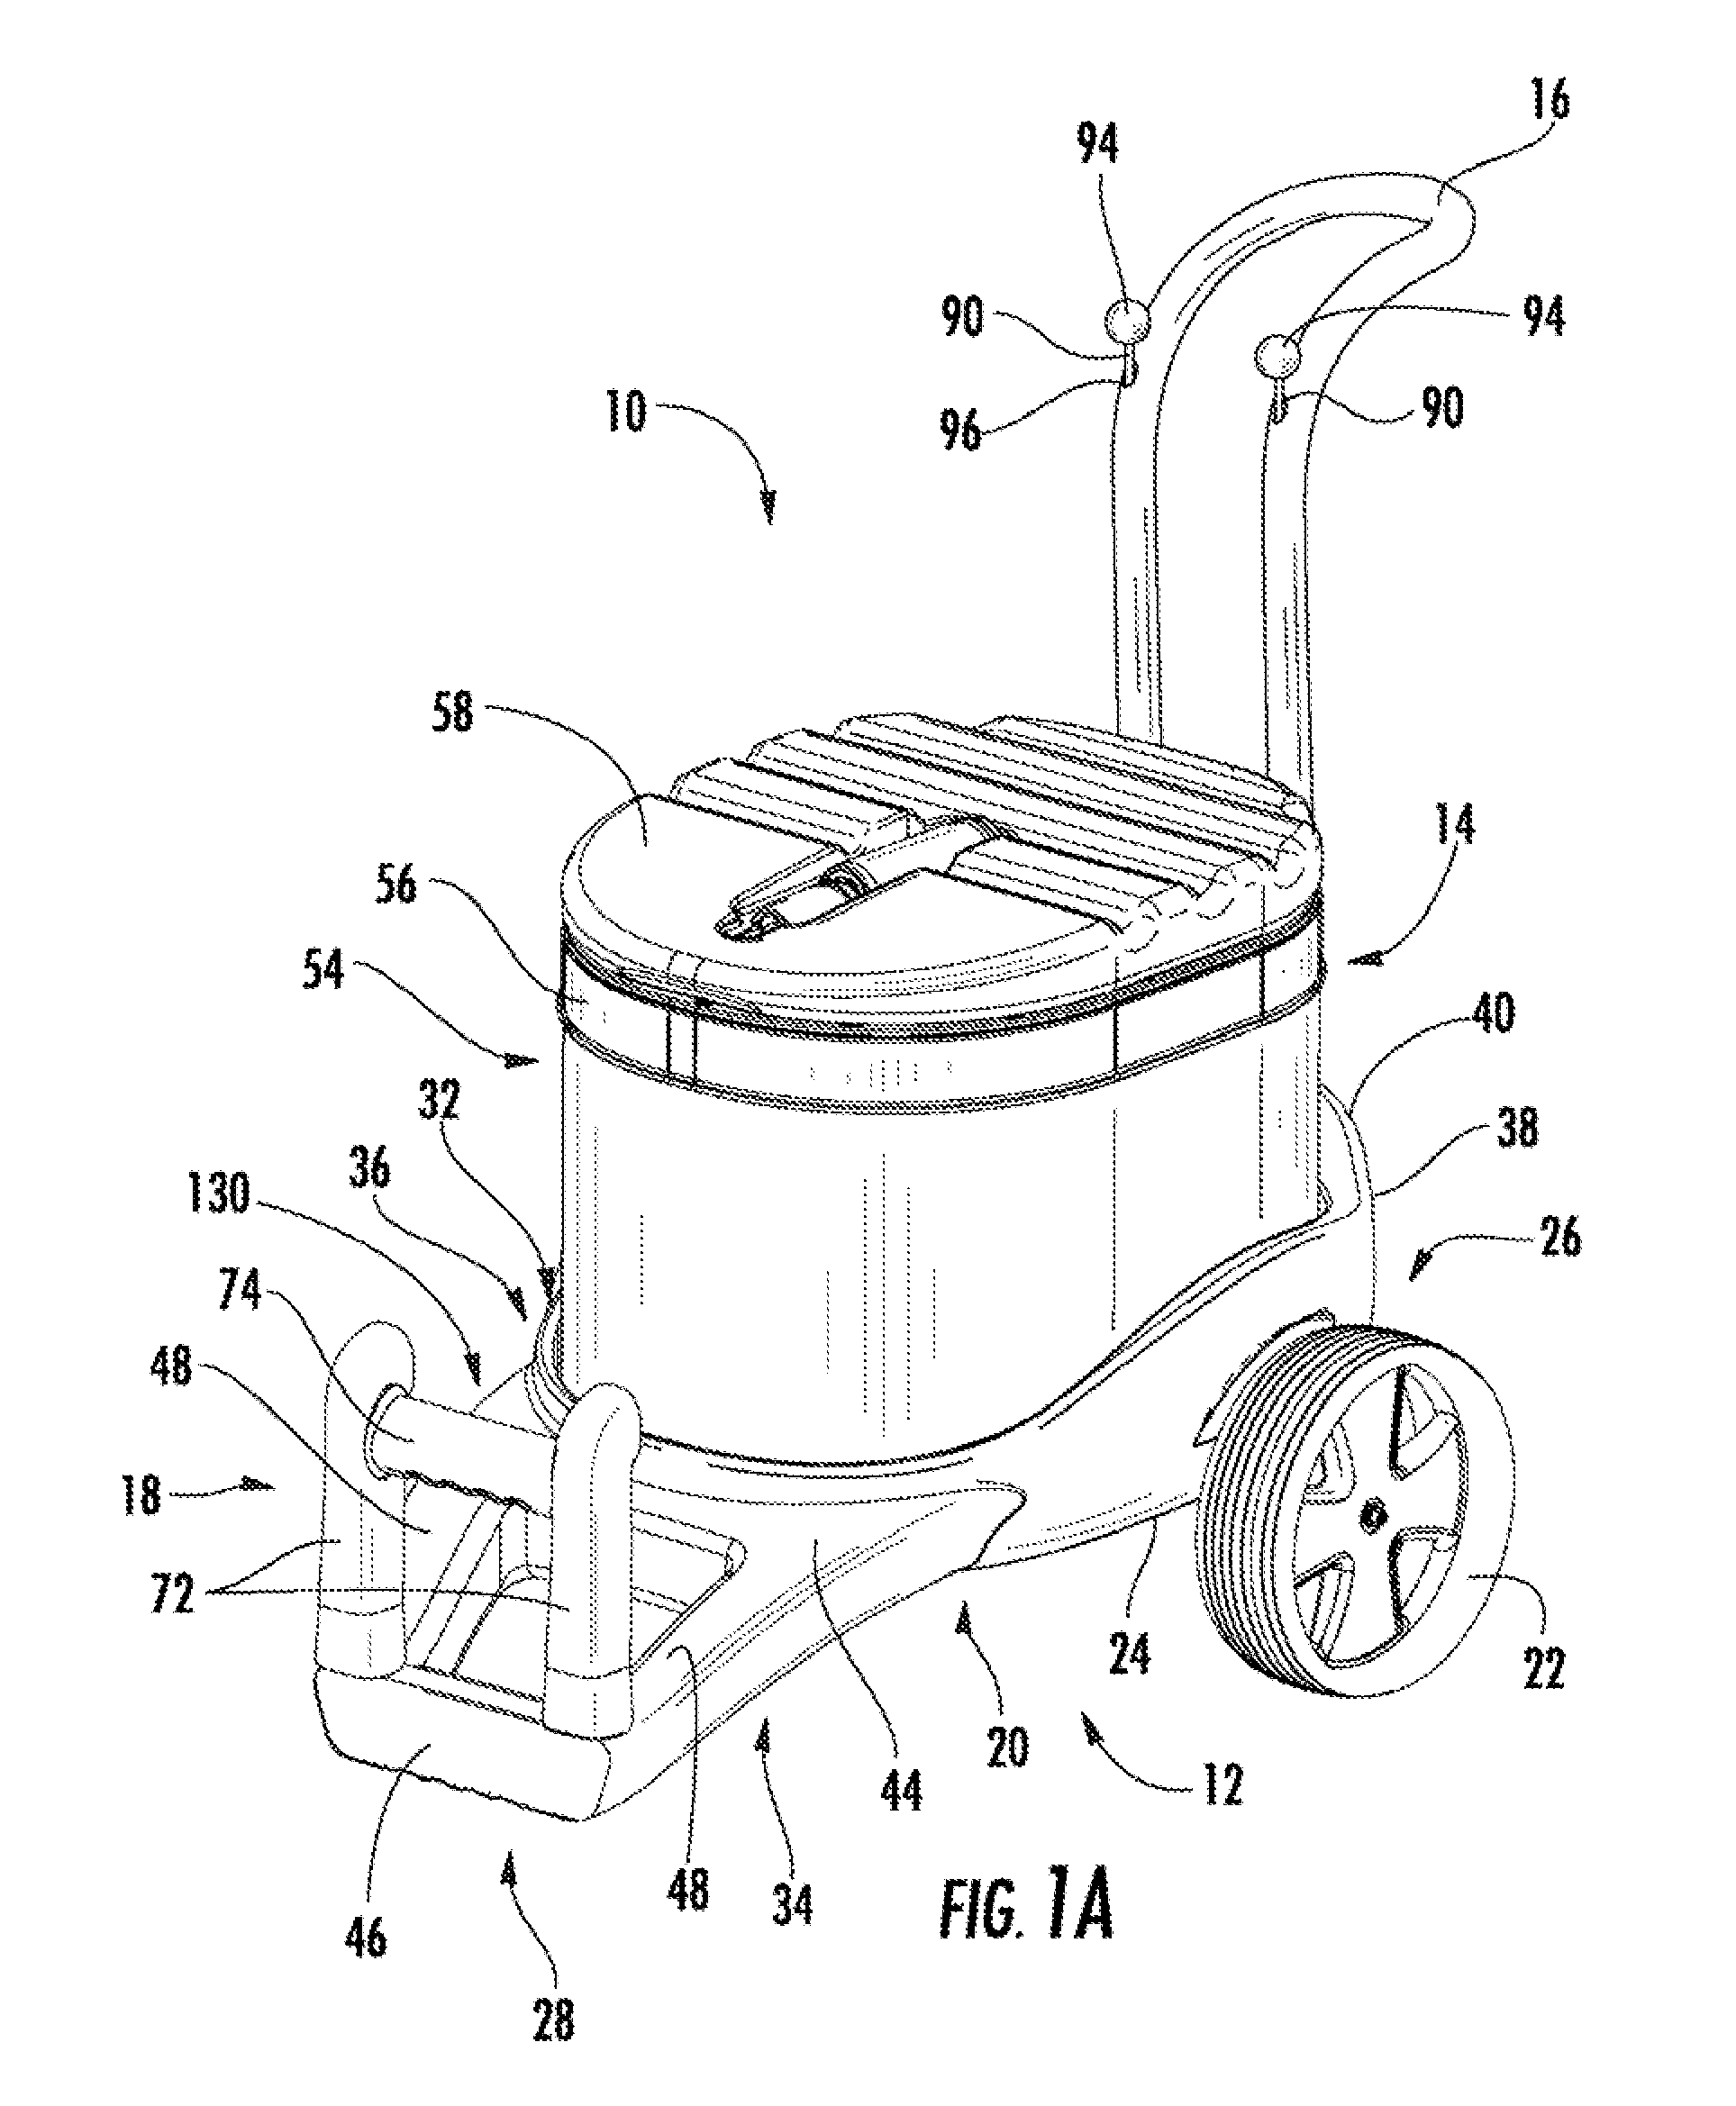 Travel cooler having separable wheeled base and insulated container